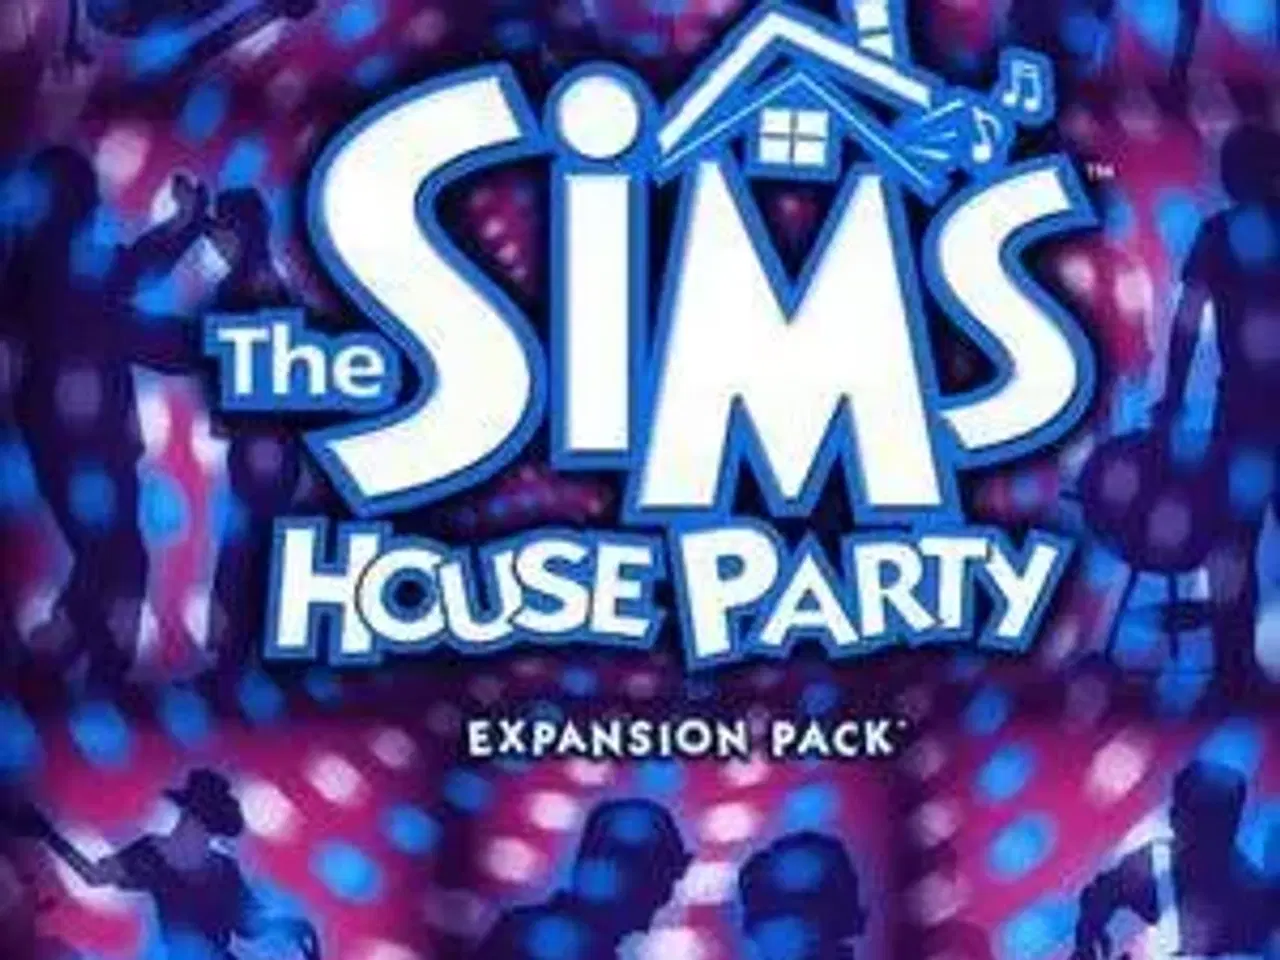 Billede 1 - The SIMS House Party EXPANSION PACK